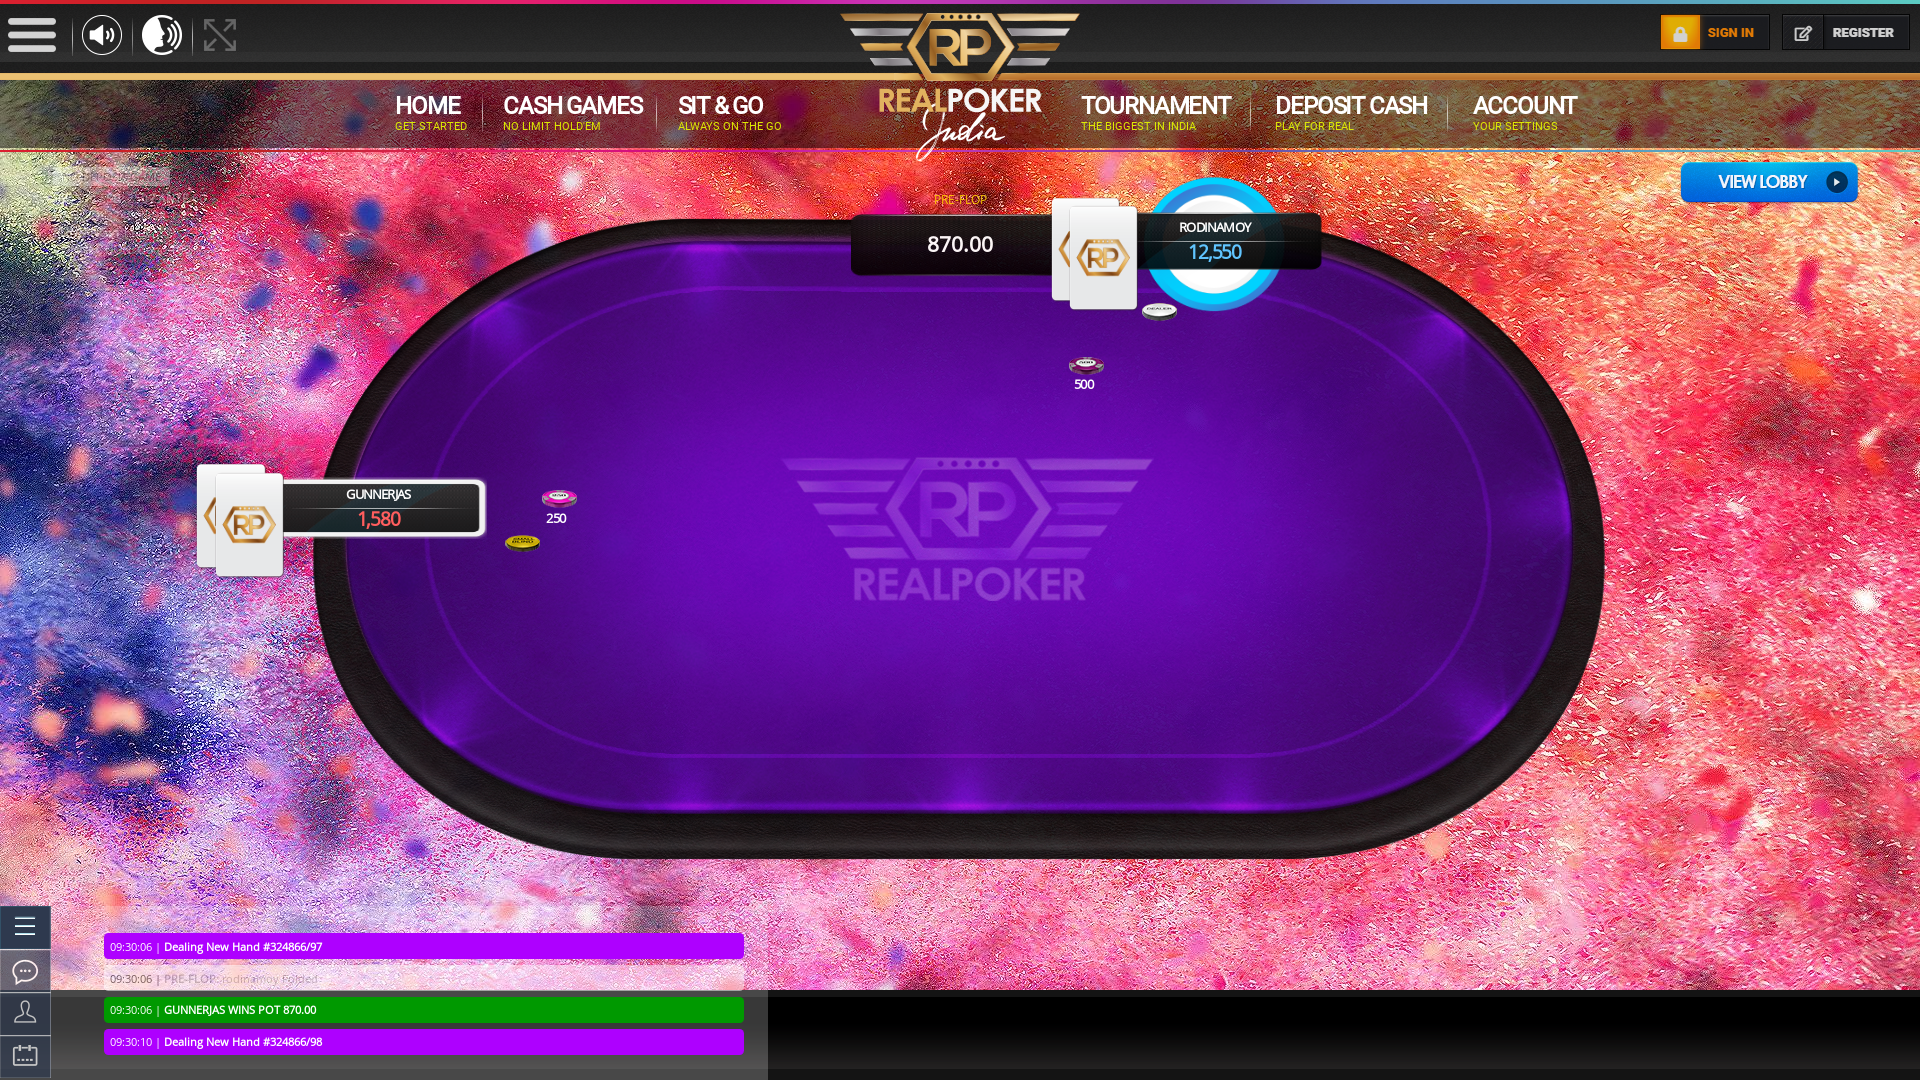 Indian online poker on a 10 player table in the 66th minute match up